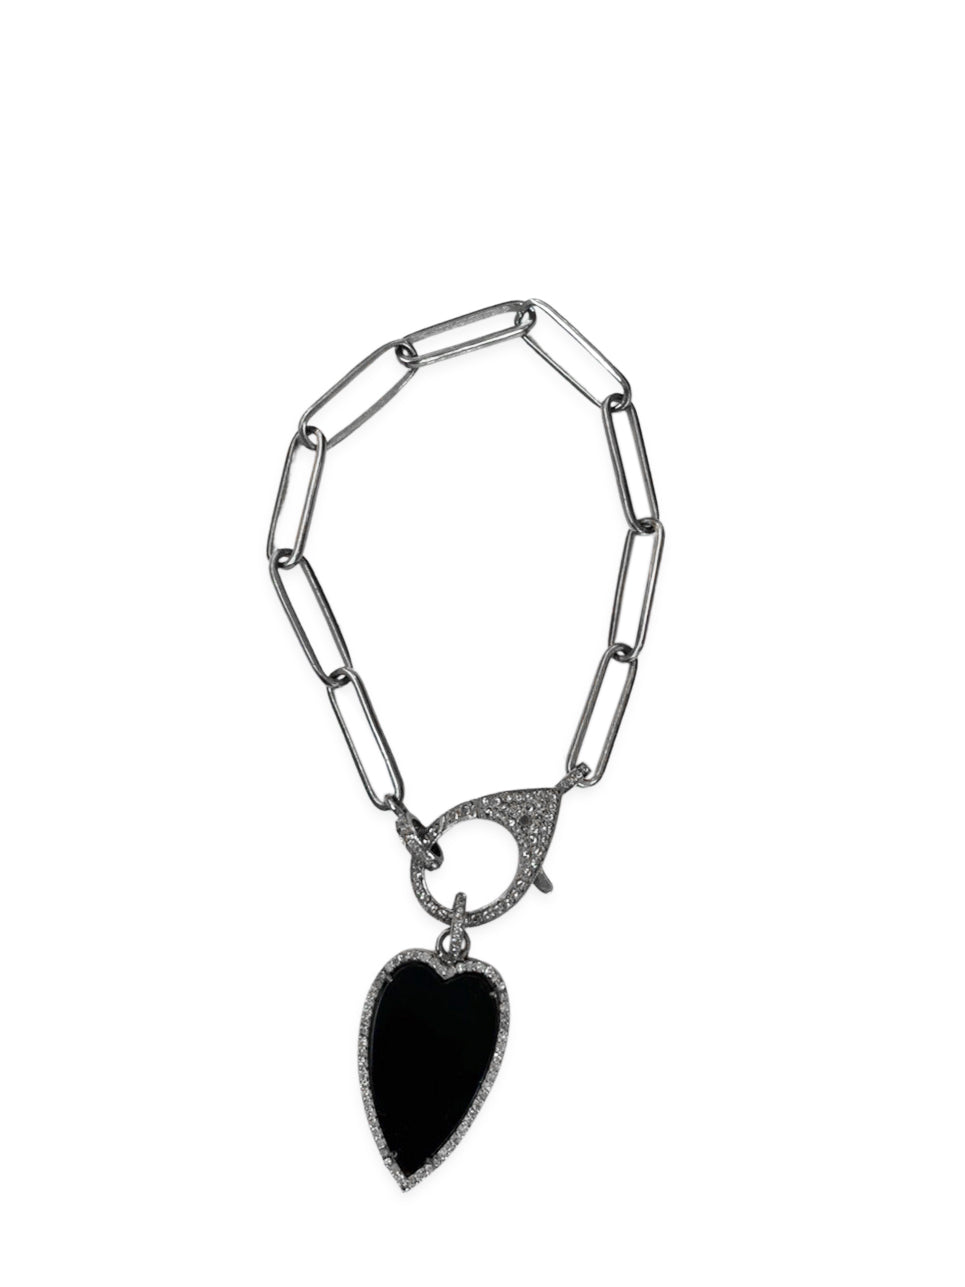 Onyx Heart with Pave Diamonds set in Sterling Silver